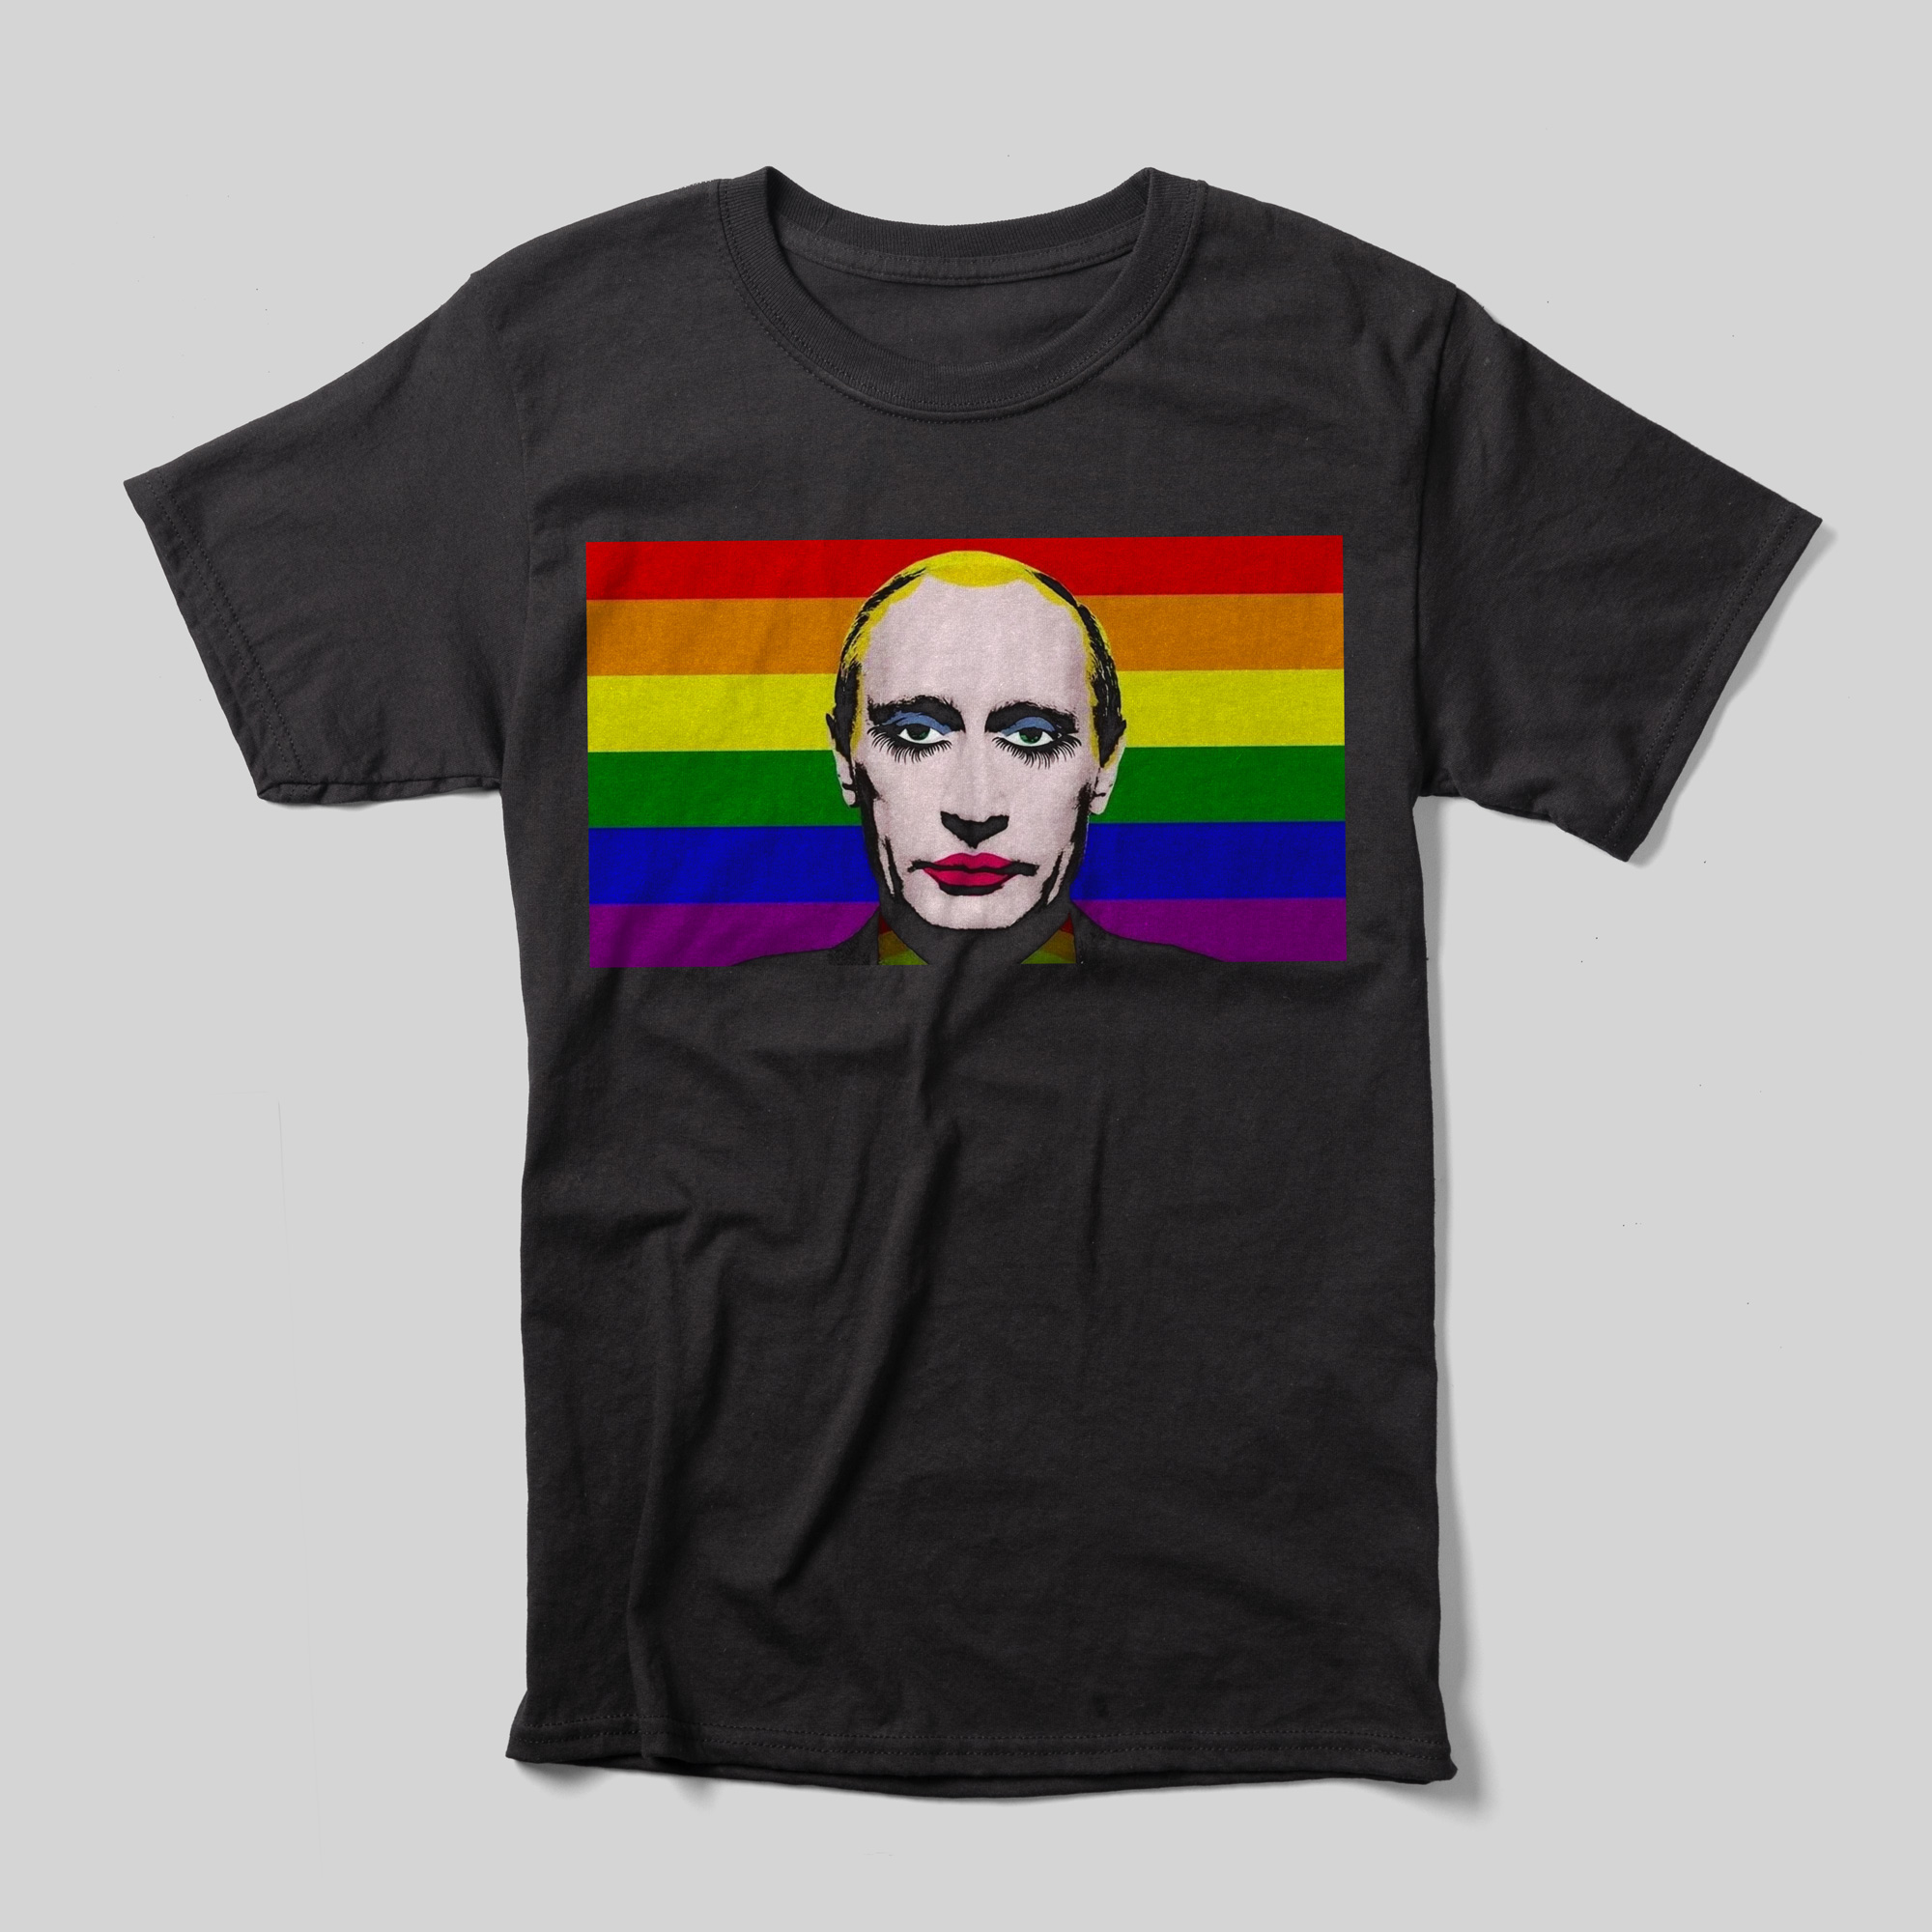 A black t-shirt with a rainbow flag and an illustration of Vladimir Putin in front wearing drag makeup.